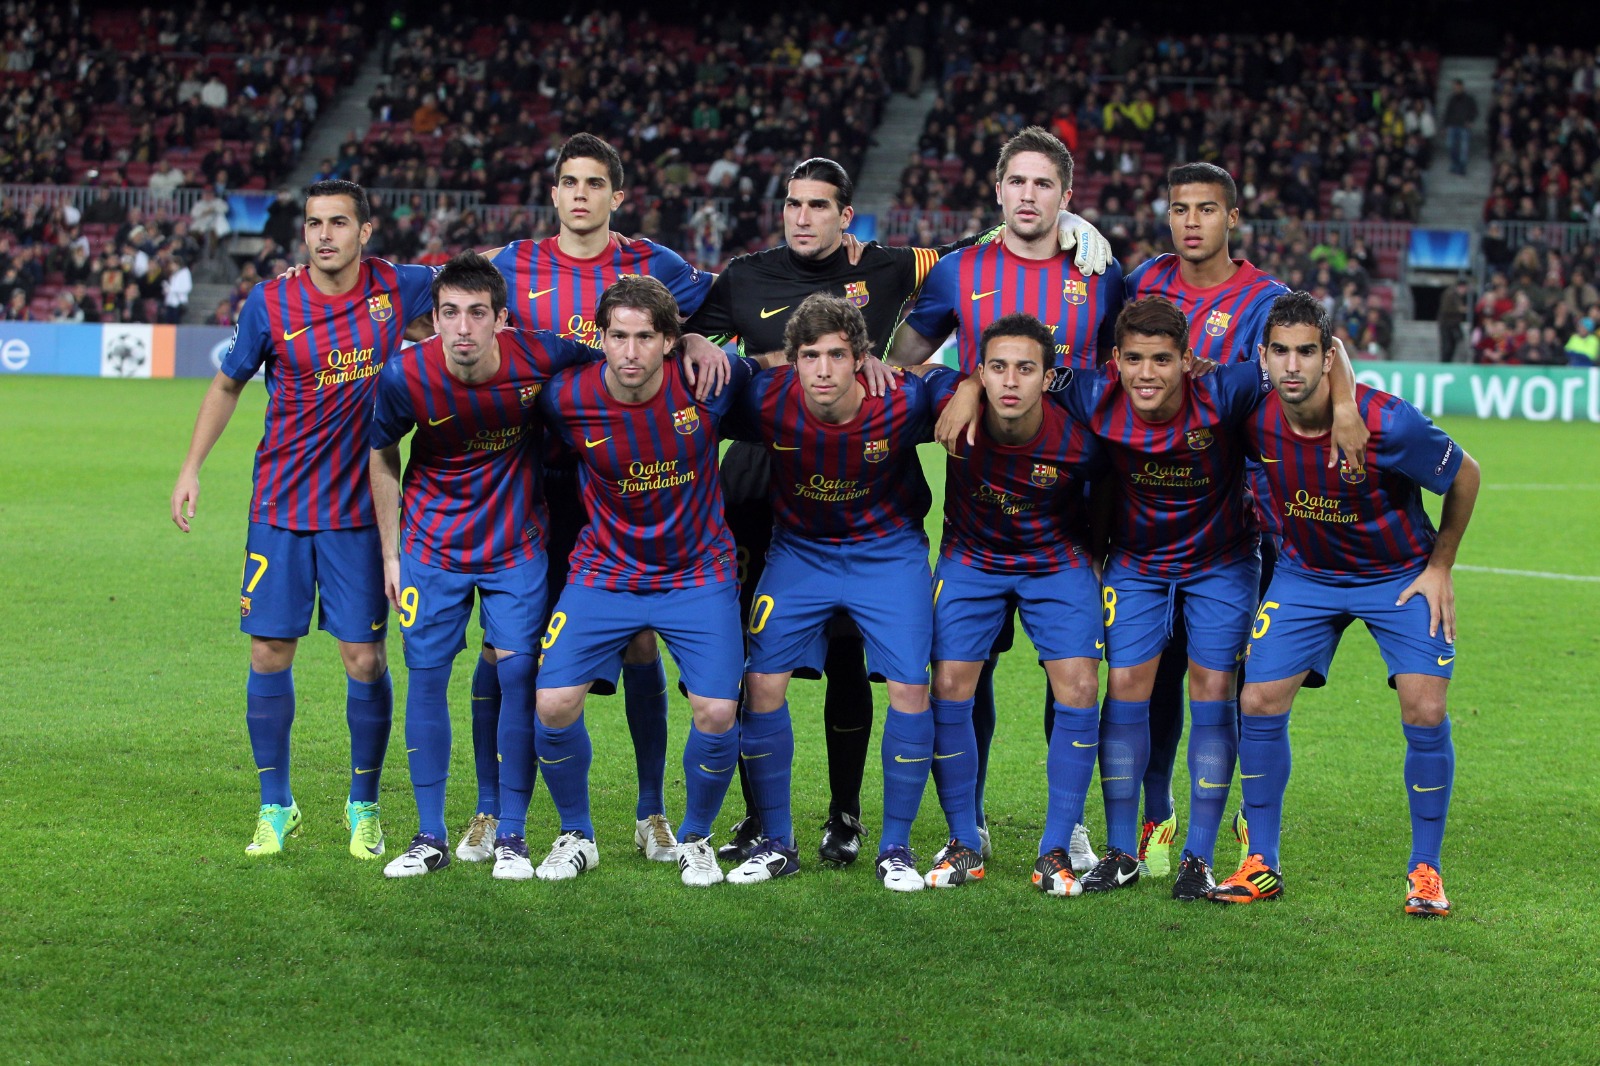 FC Barcelona na Twitterze: "The #DynamoBarça XI is our young